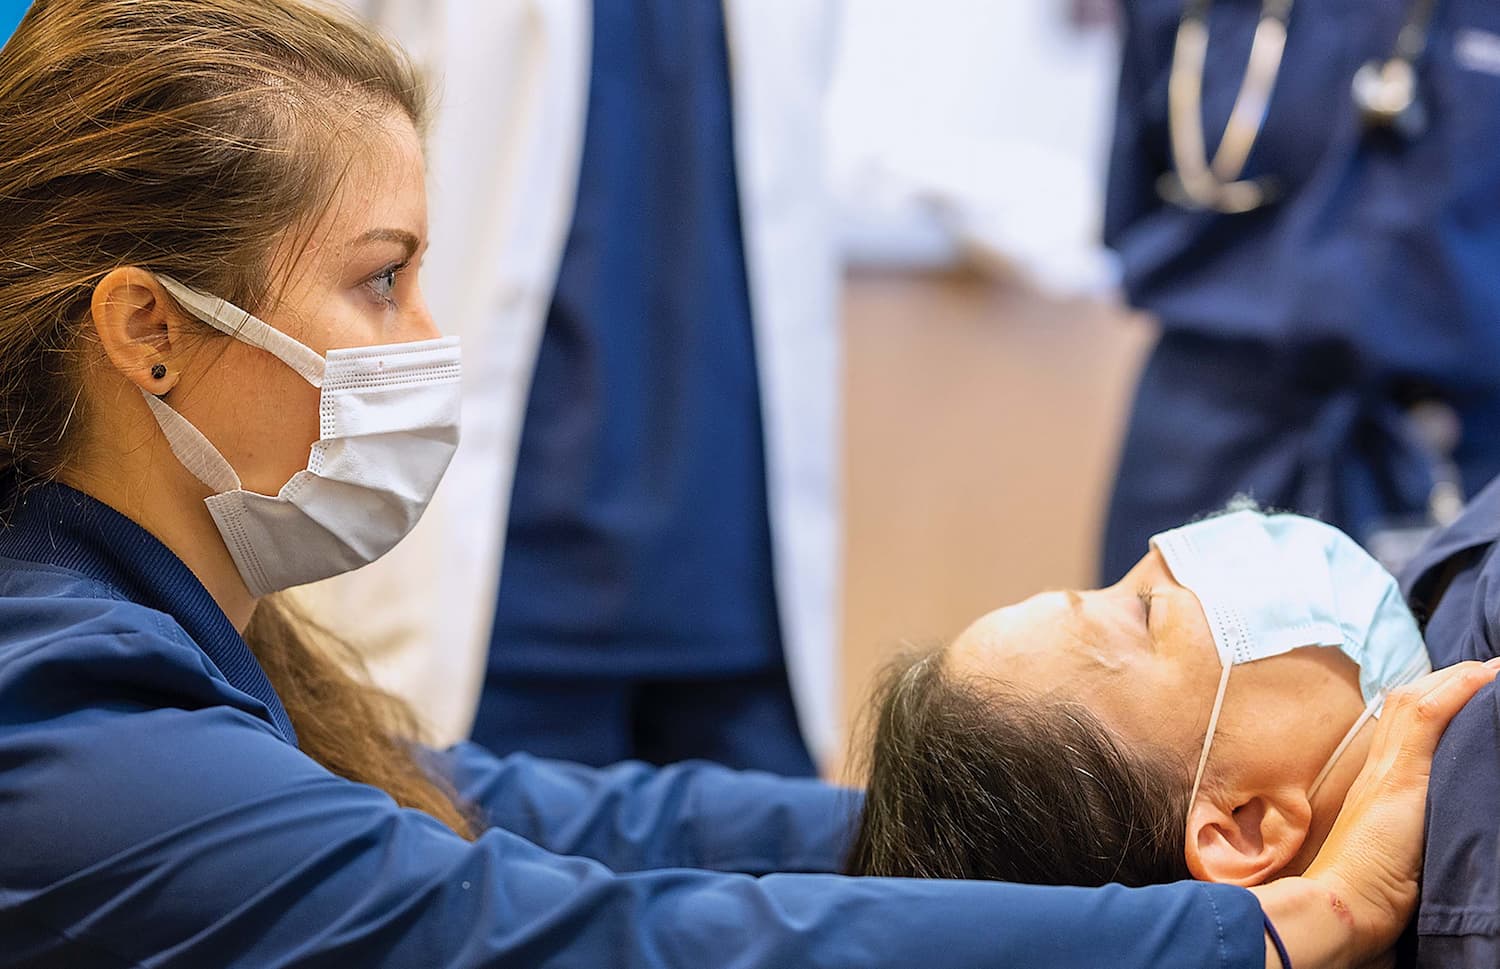 A person in scrubs and wearing a mask massaging the shoulders of another person that is laying down, also wearing a mask.